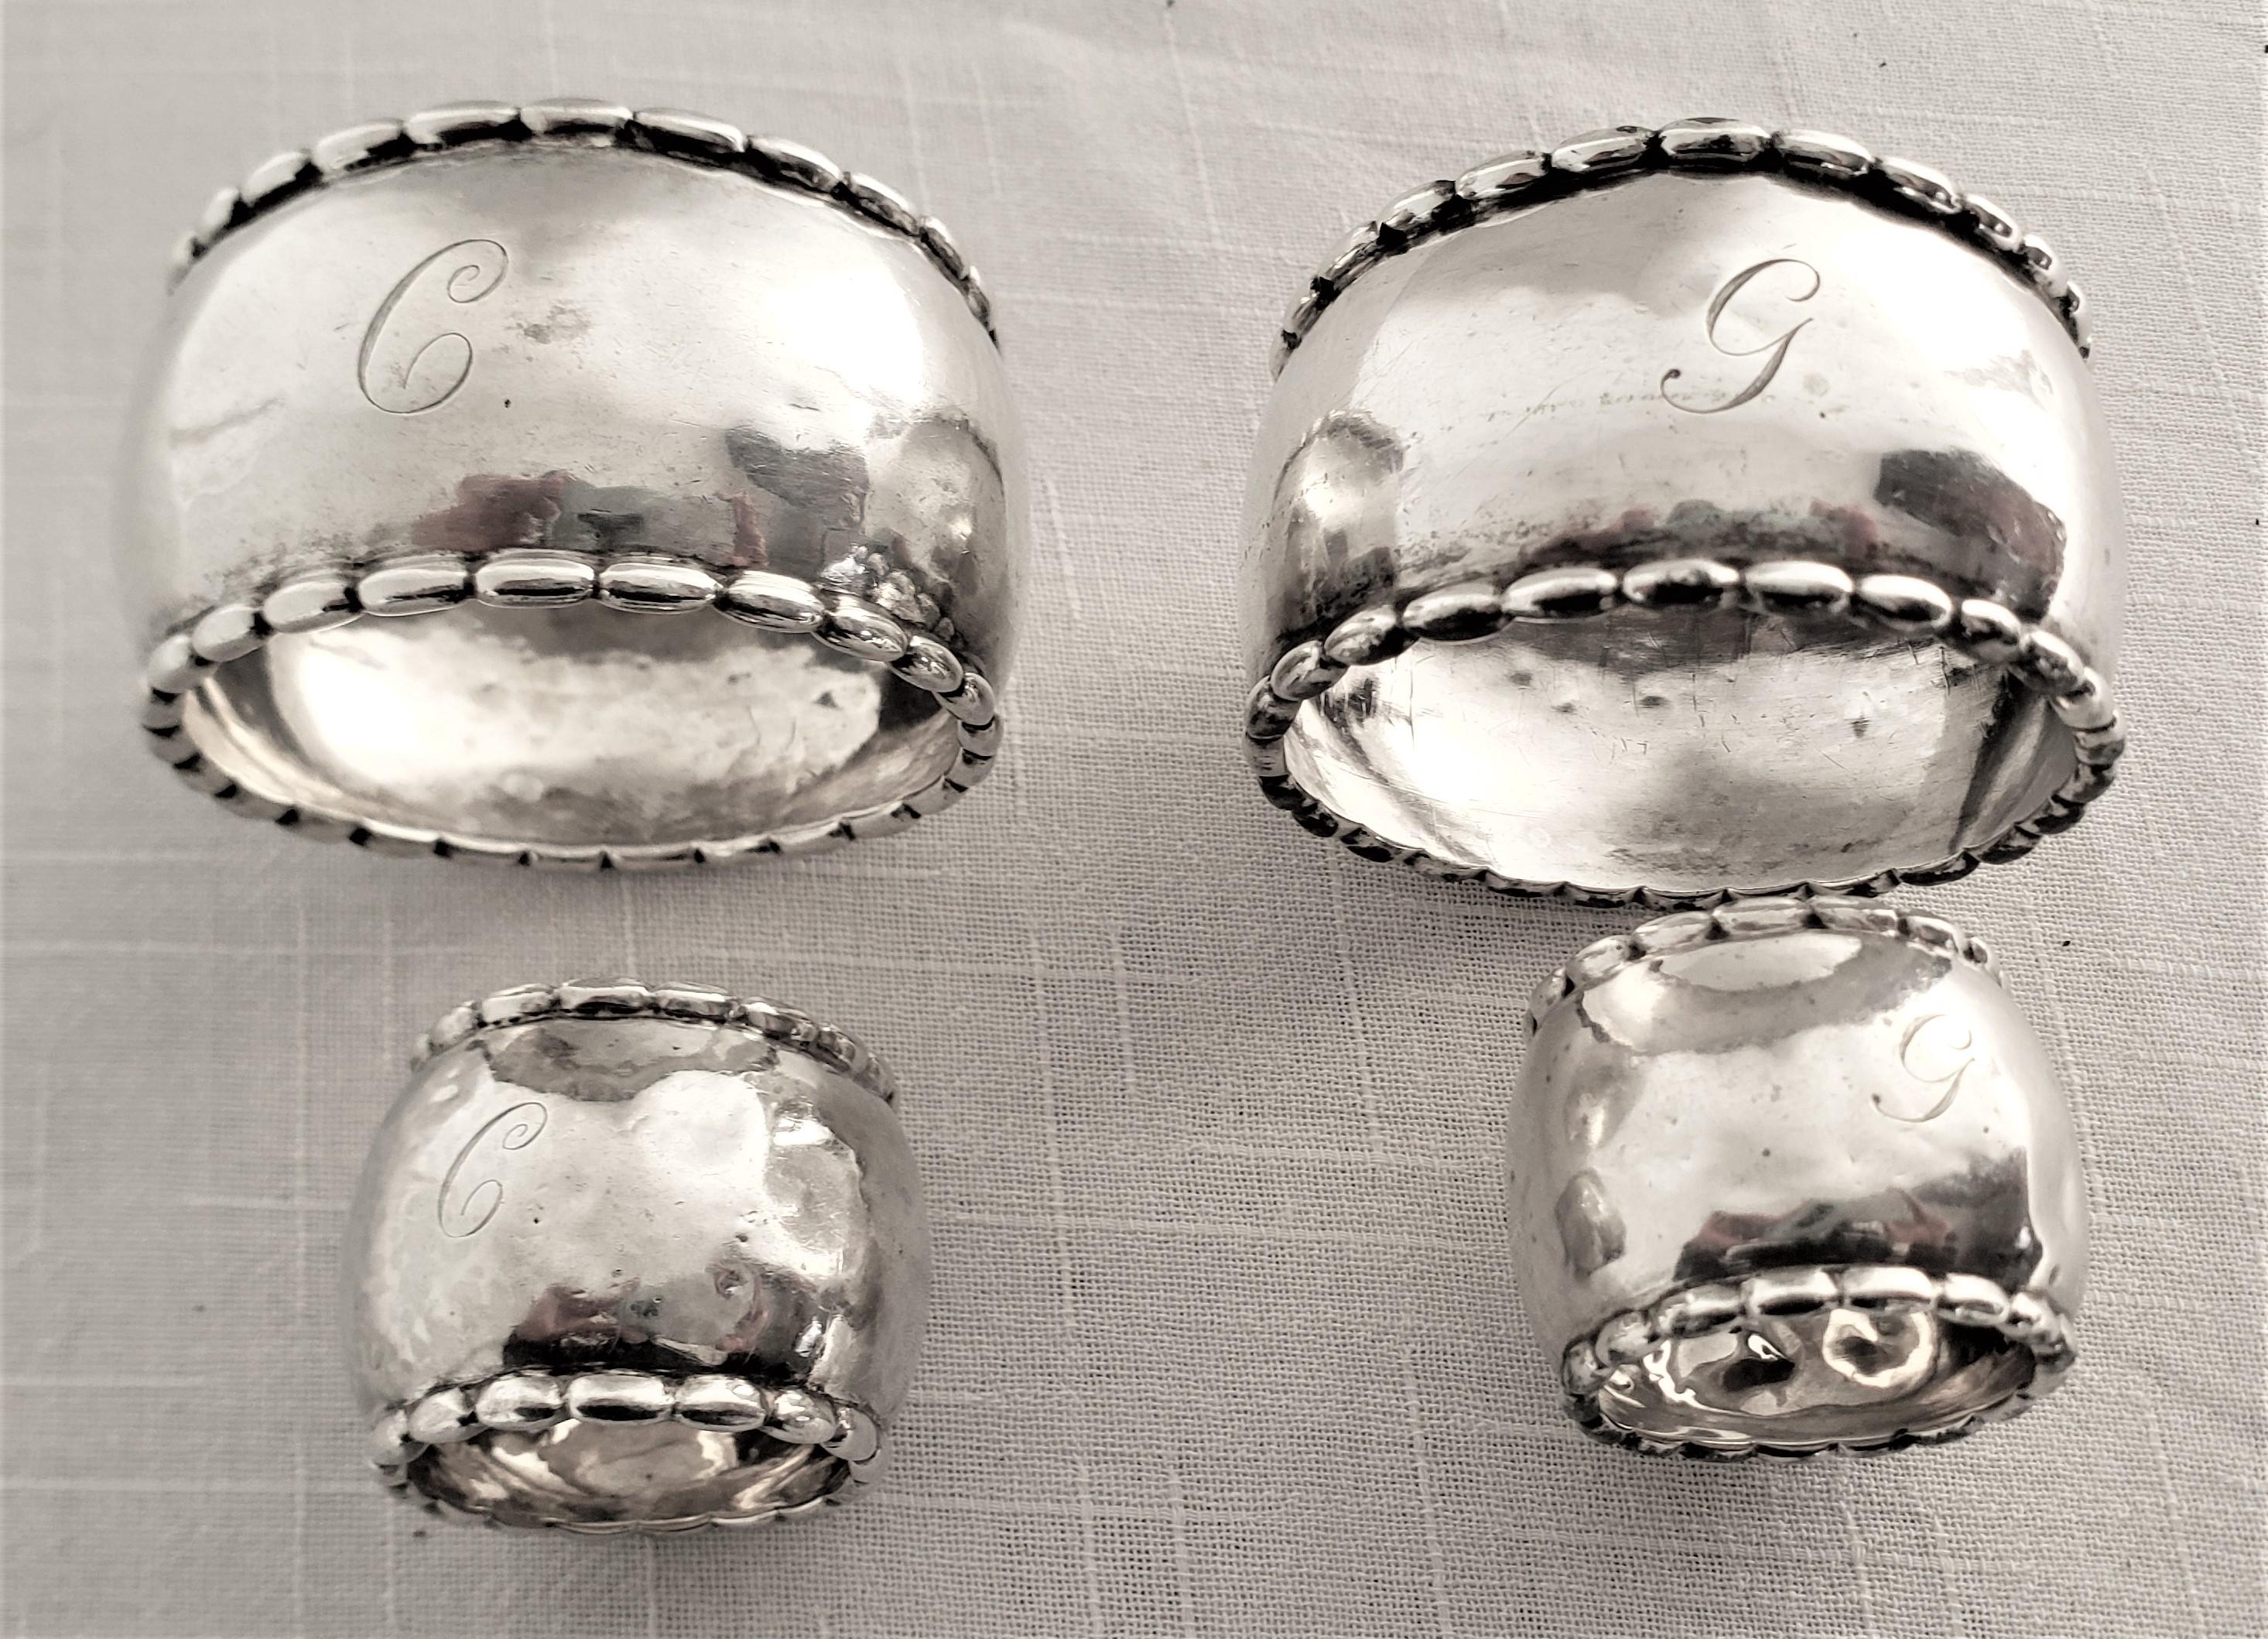 This set of four sterling silver napkin rings was made by the highly renowned Georg Jensen in approximately 1920 in an Art Deco style. This set of napkin rings appears as hand hammered with a simple convex body with an accenting stylized rolled